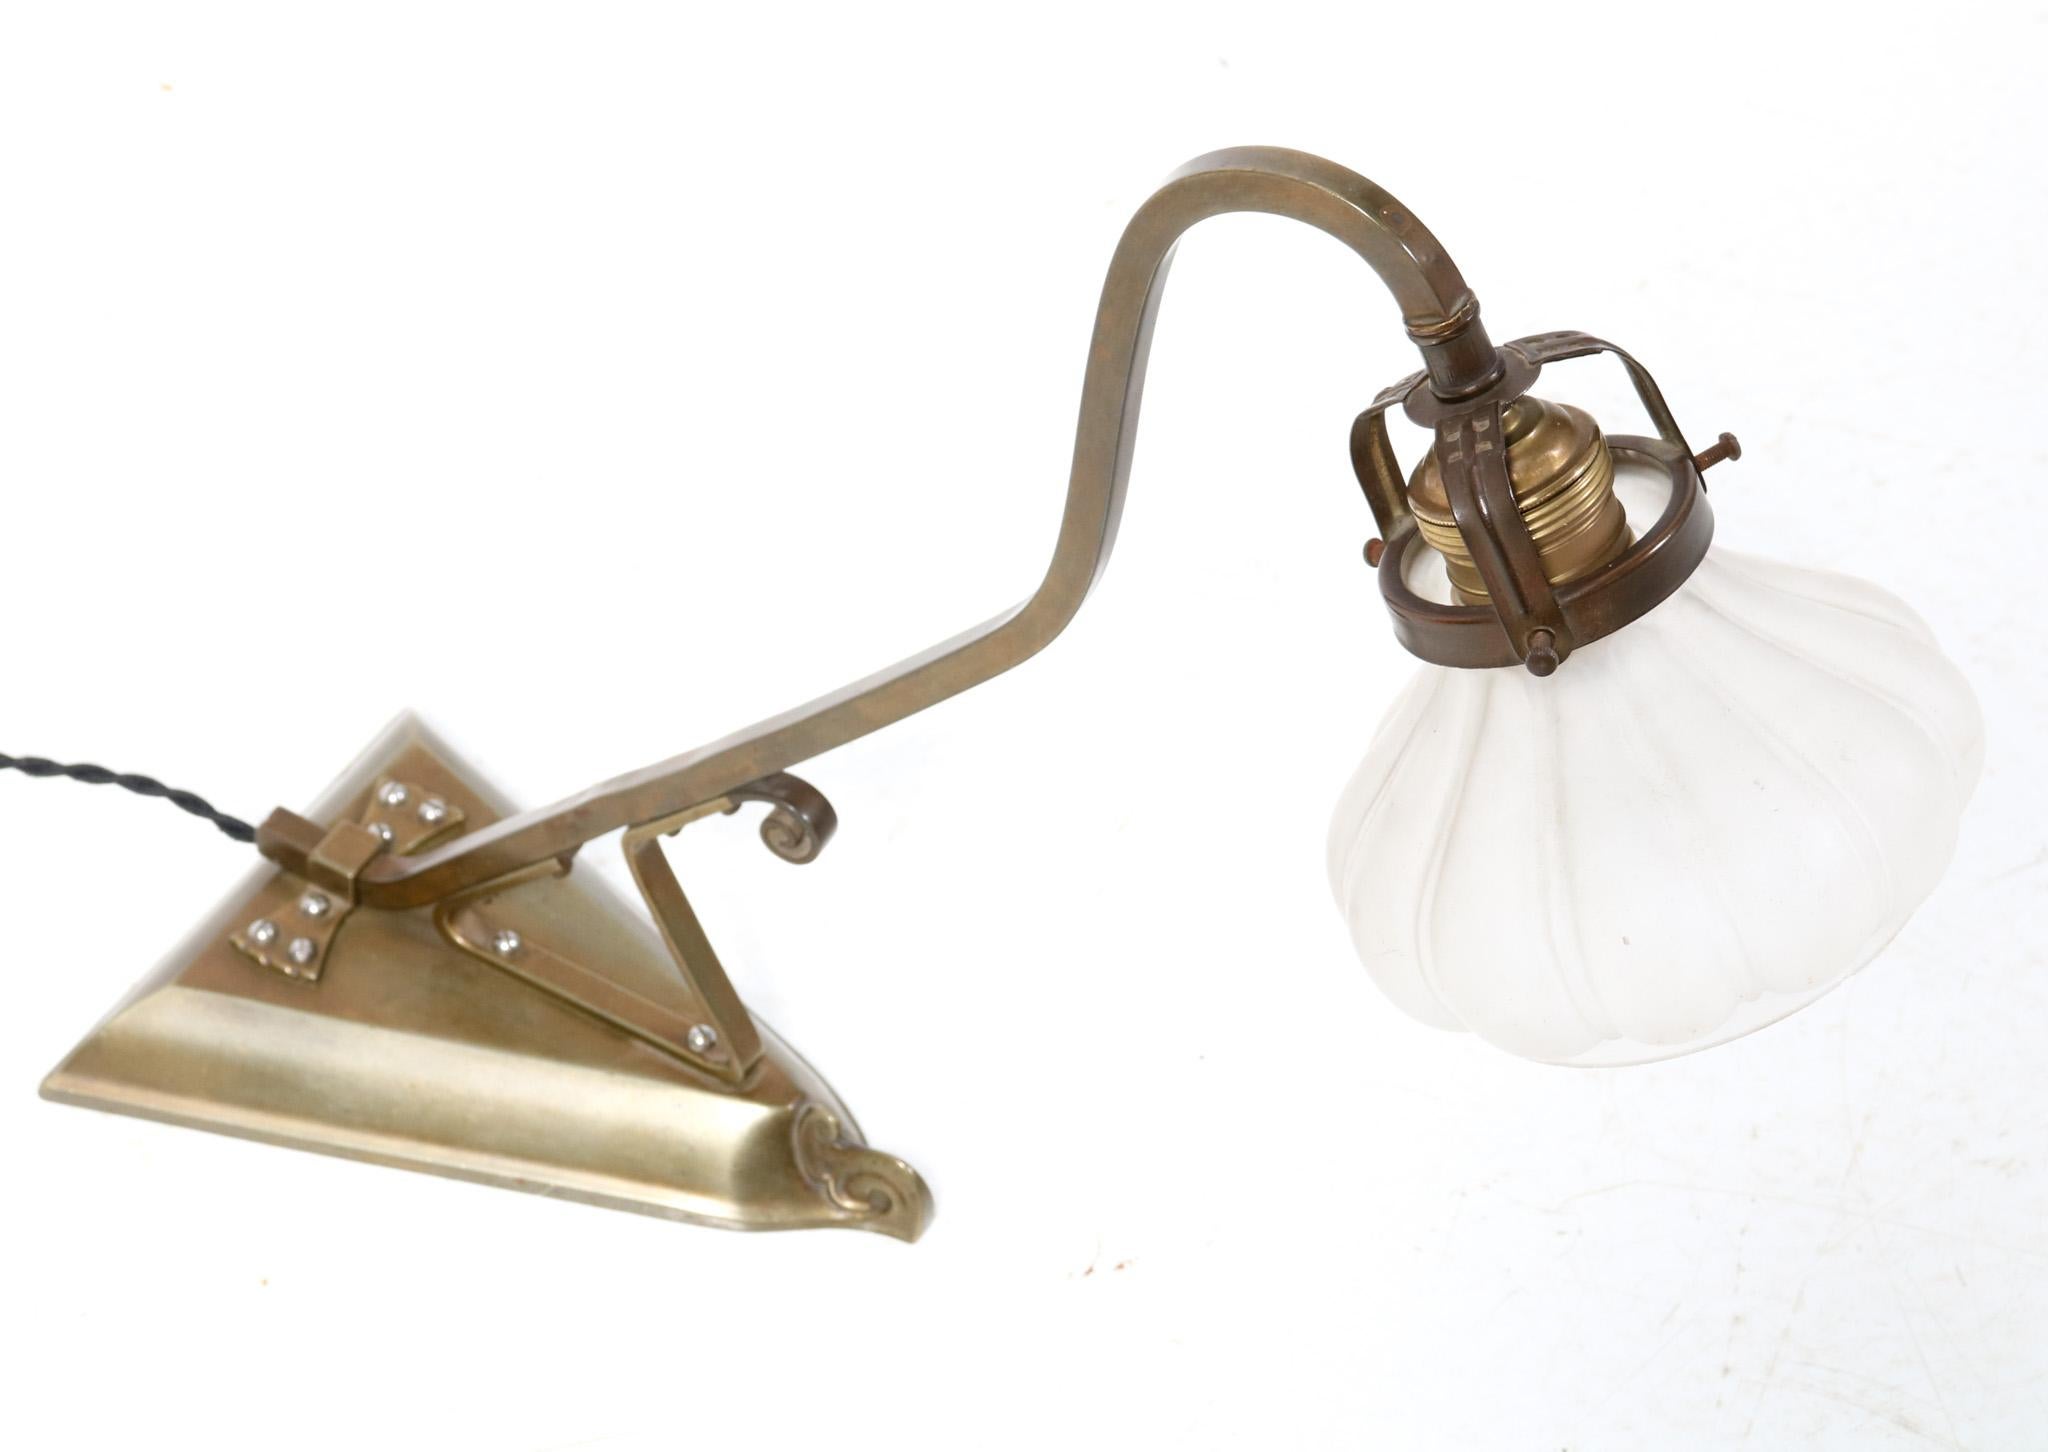 Stunning and rare Art Nouveau table lamp or desk lamp.
Striking Dutch design from the 1900s.
Patinated brass frame with original hand-blown glass shade.
Rewired with one original socket for E-27 light bulb.
This wonderful Art Nouveau table lamp or